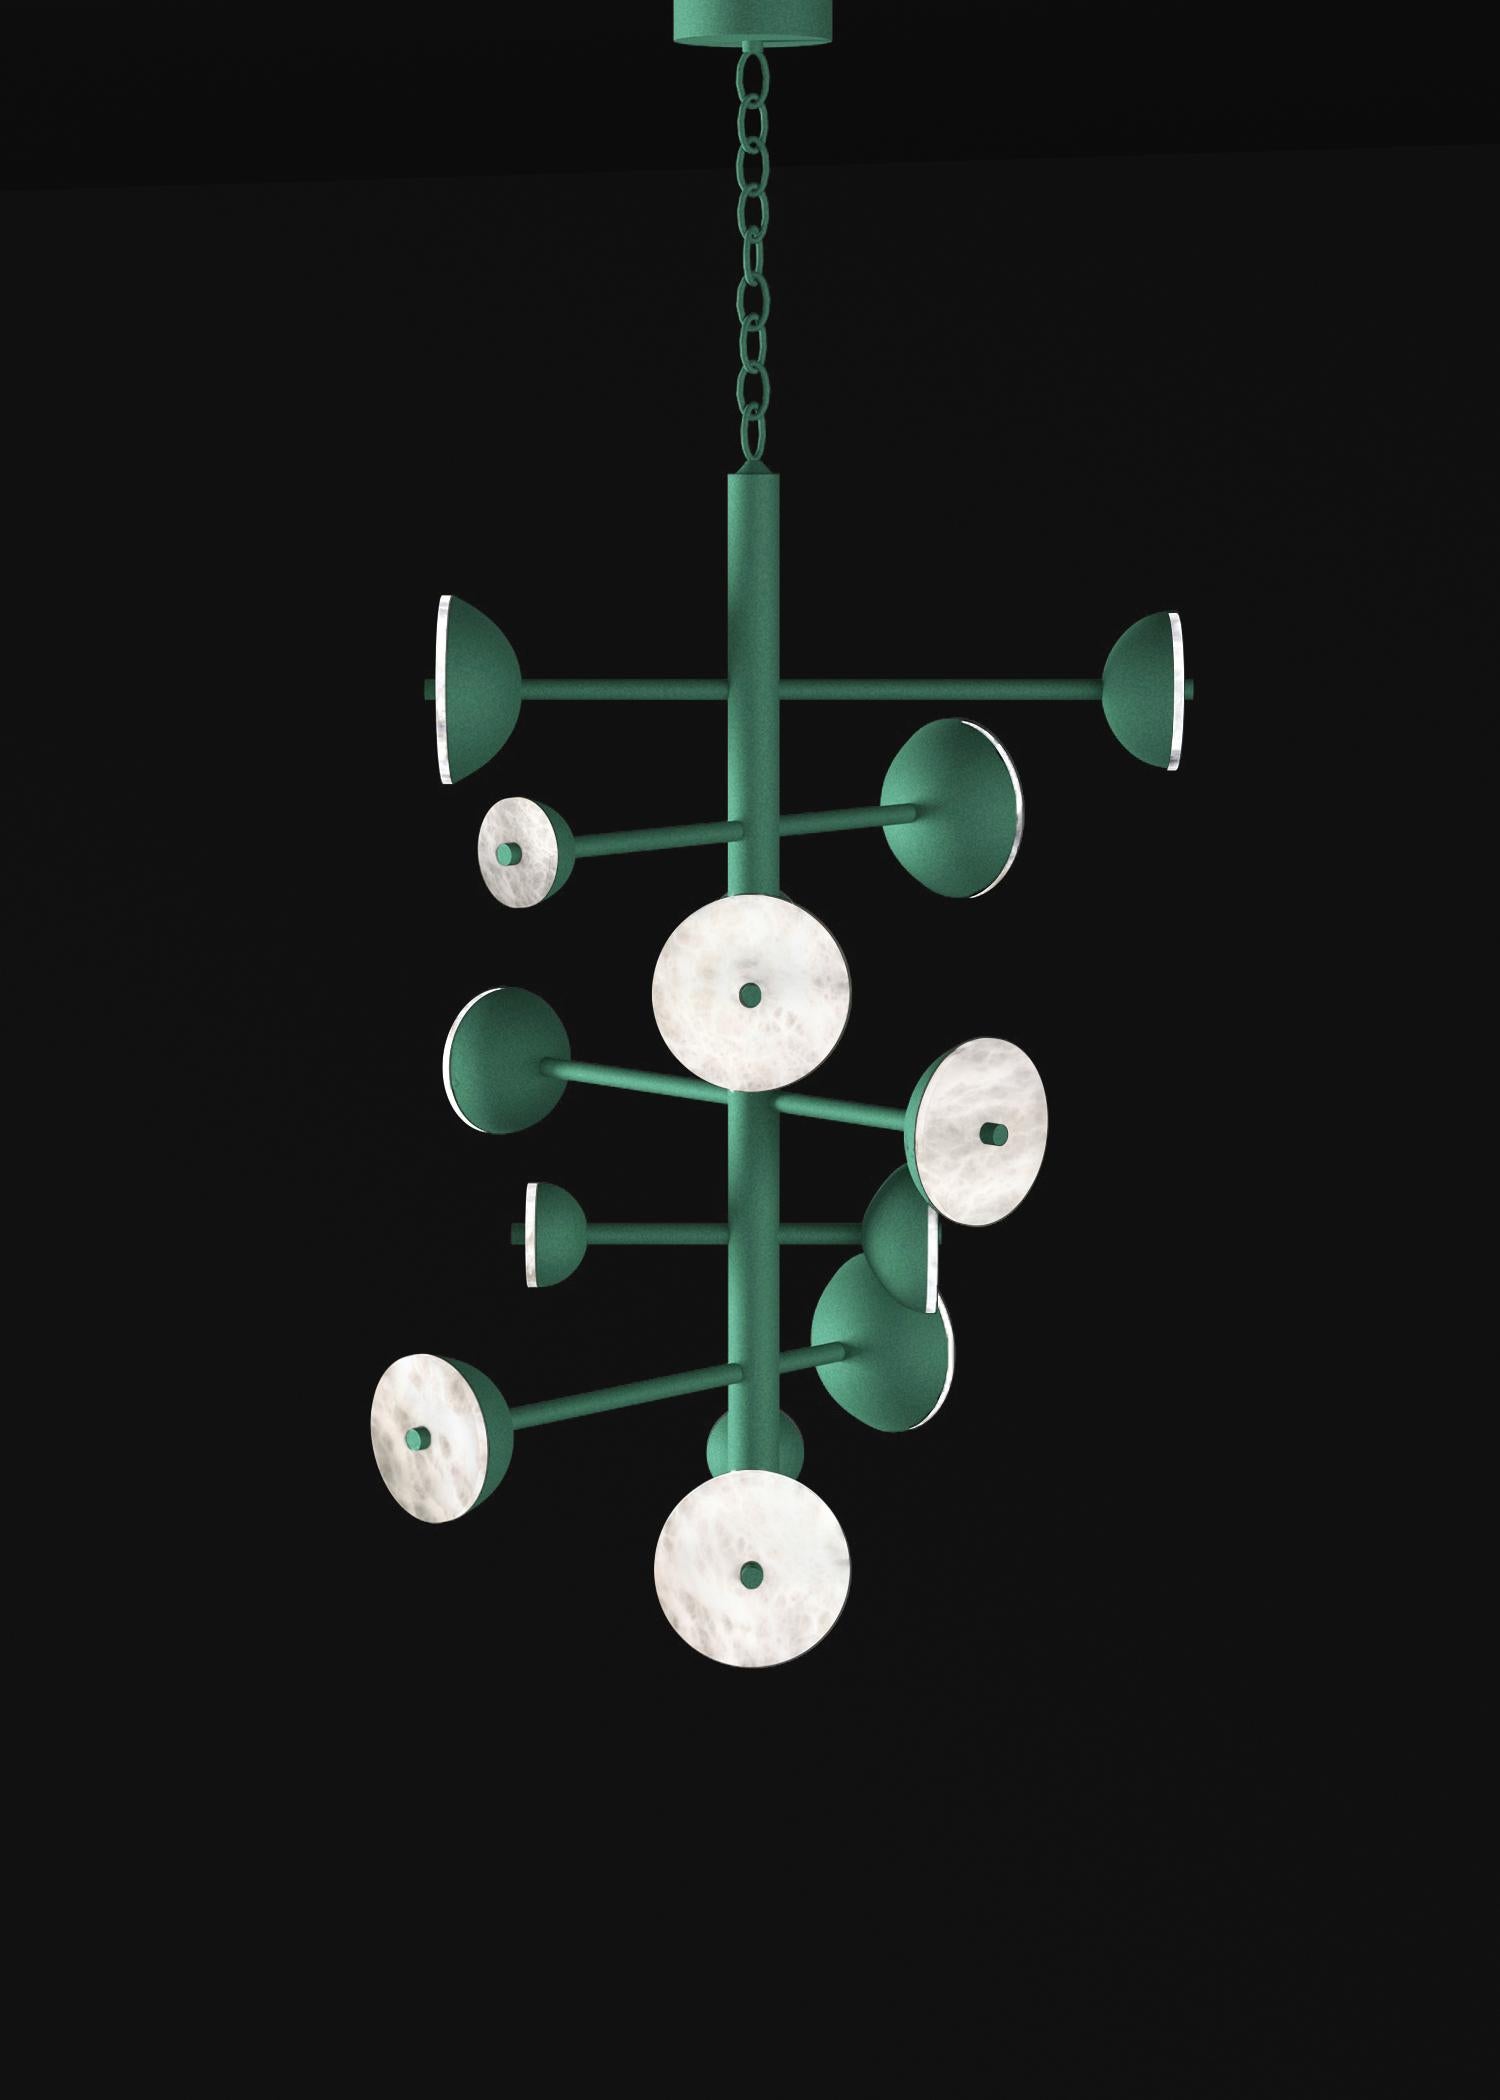 Teti Freedom Green Metal Chandelier by Alabastro Italiano
Dimensions: D 74,5 x W 77,5 x H 110 cm.
Materials: White alabaster and metal.

Available in different finishes: Shiny Silver, Bronze, Brushed Brass, Ruggine of Florence, Brushed Burnished,